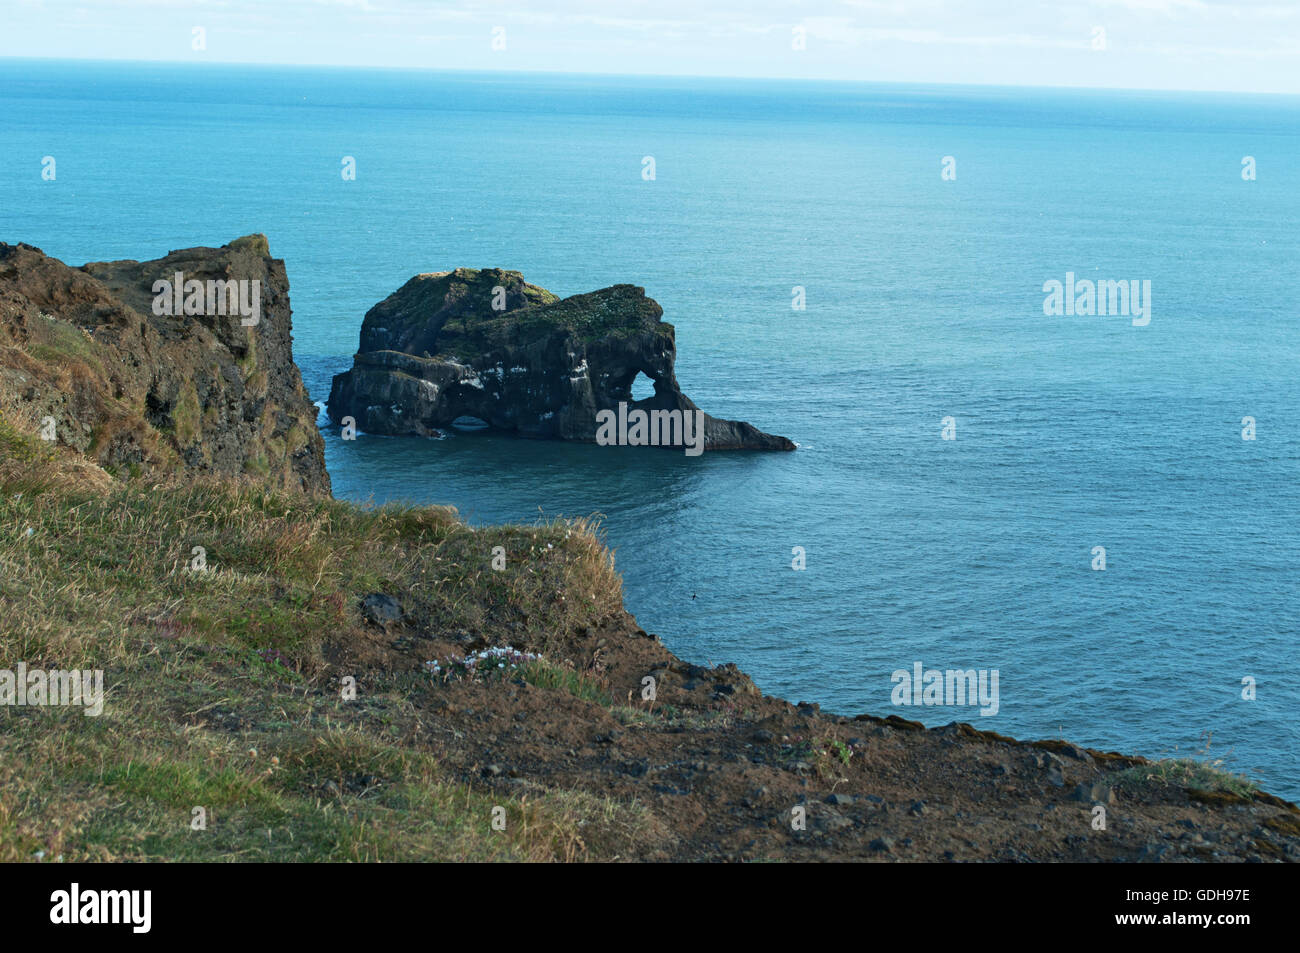 Iceland: rocks and Artic Ocean, view from the promontory of Dyrholaey, near Vik i Myrdal Stock Photo